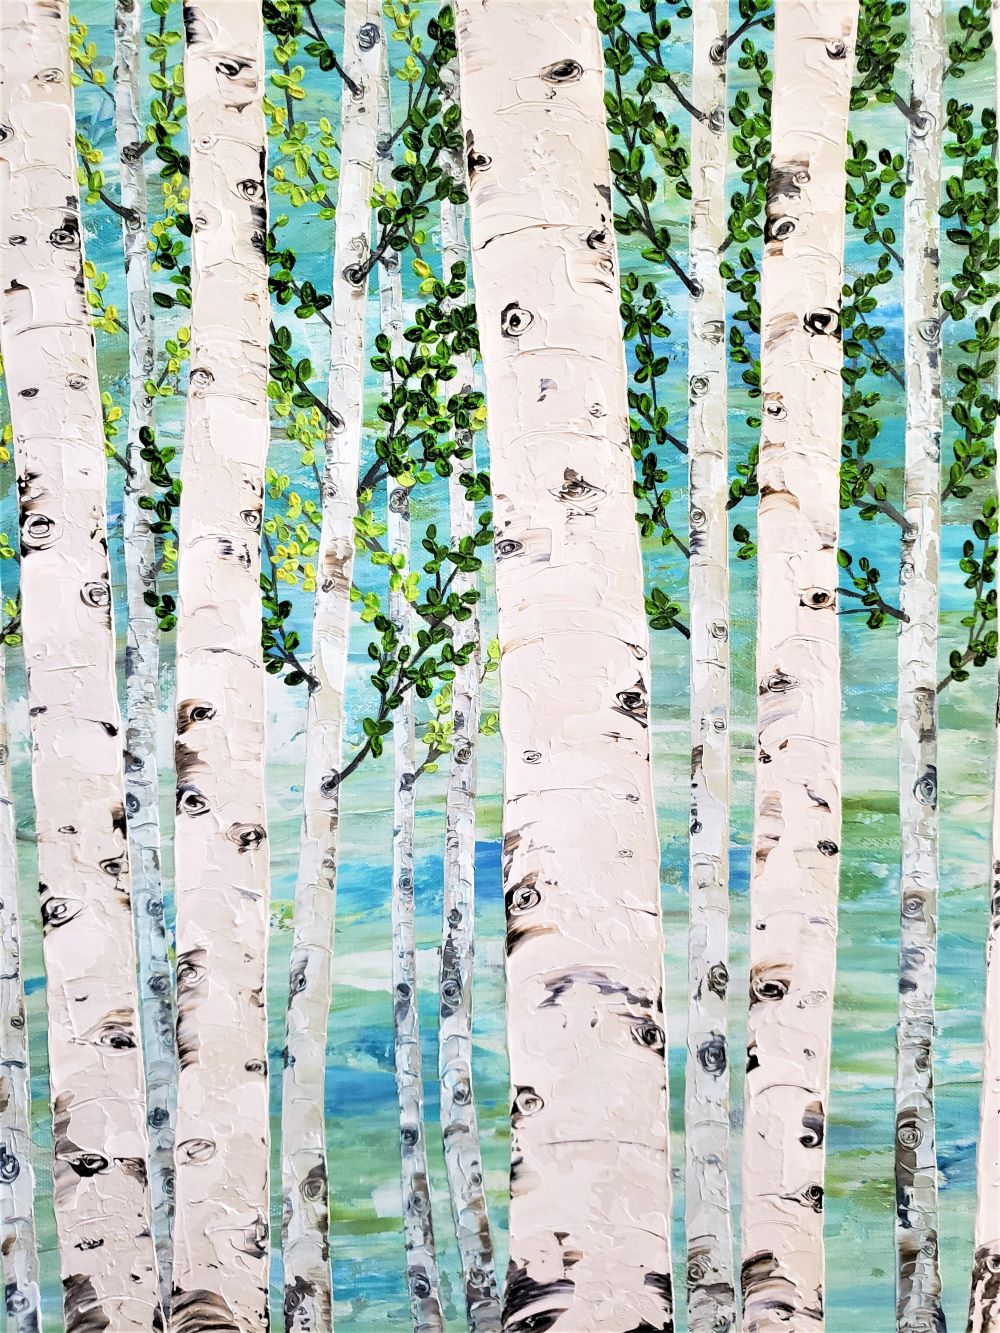 a different section close up of tree painting to show detail